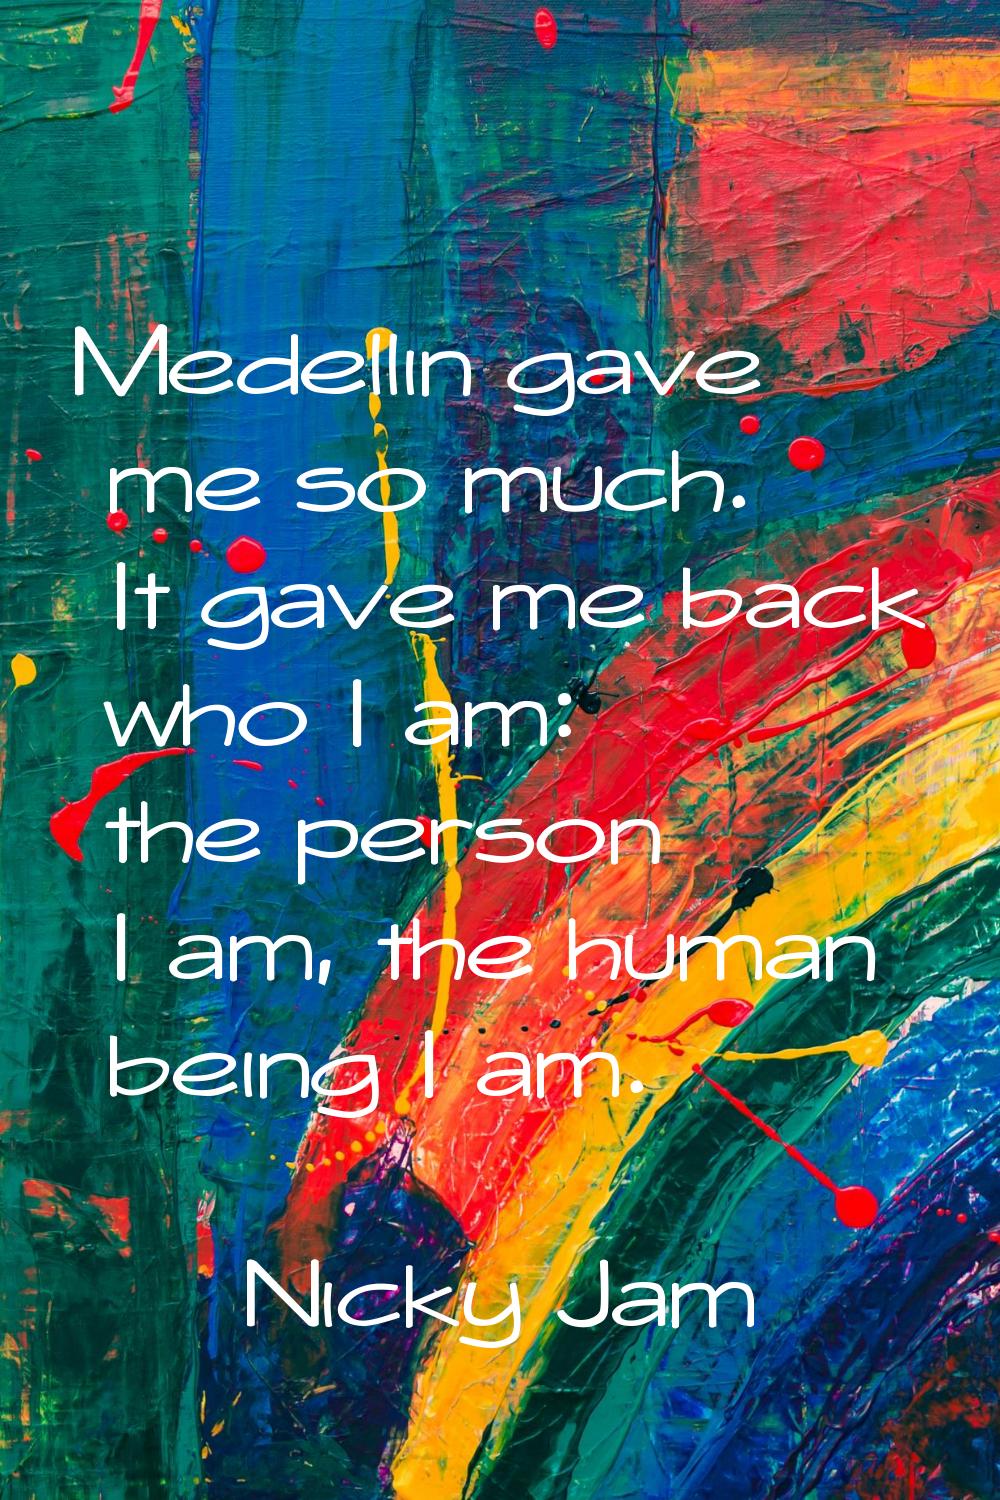 Medellin gave me so much. It gave me back who I am: the person I am, the human being I am.